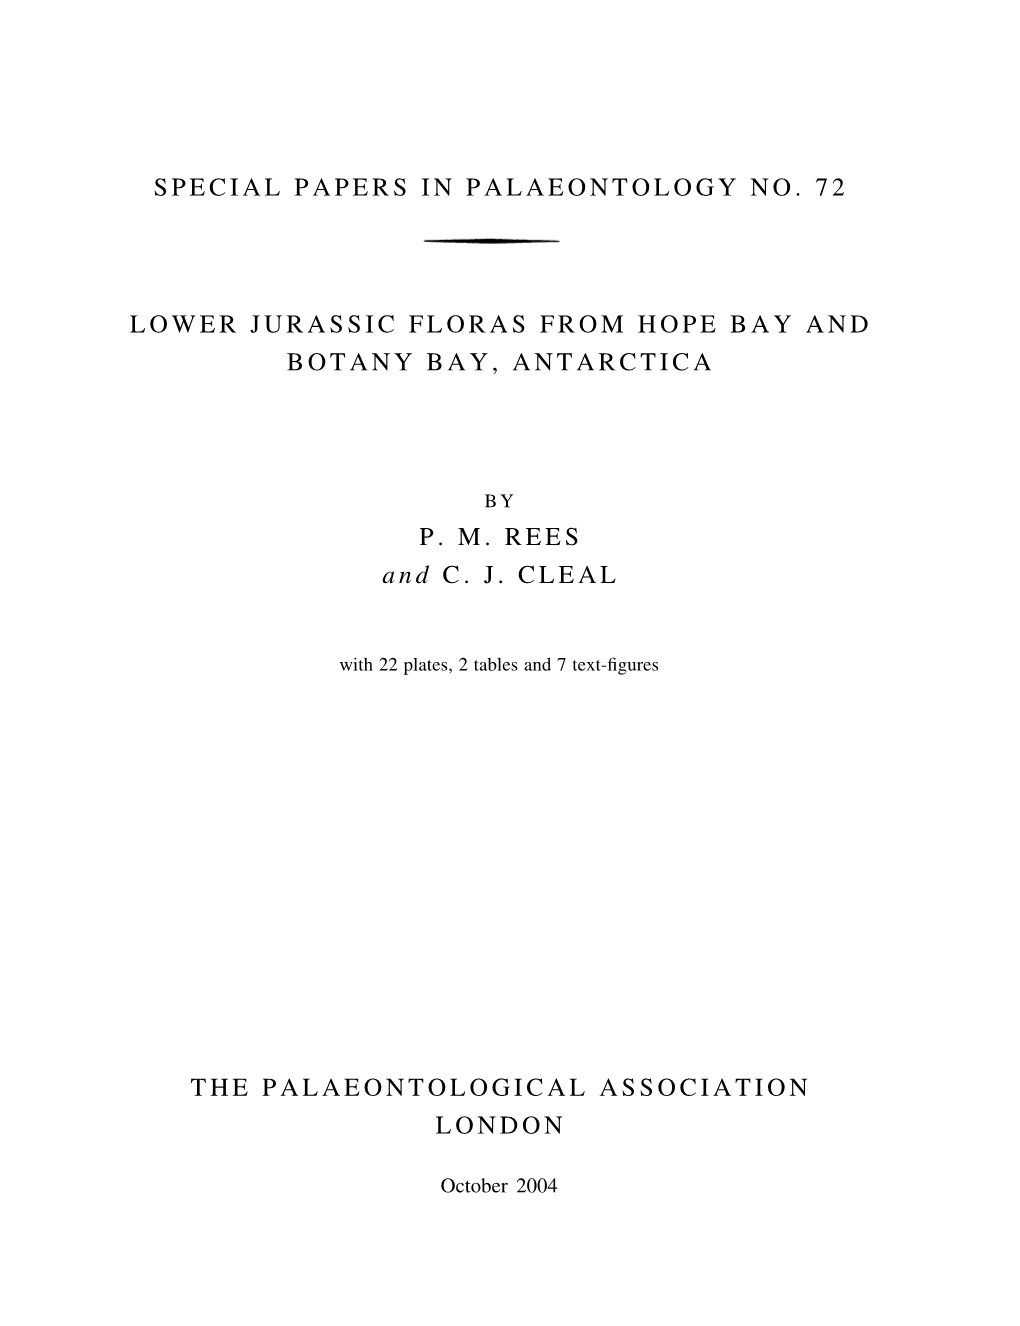 Special Papers in Palaeontology No. 72 Lower